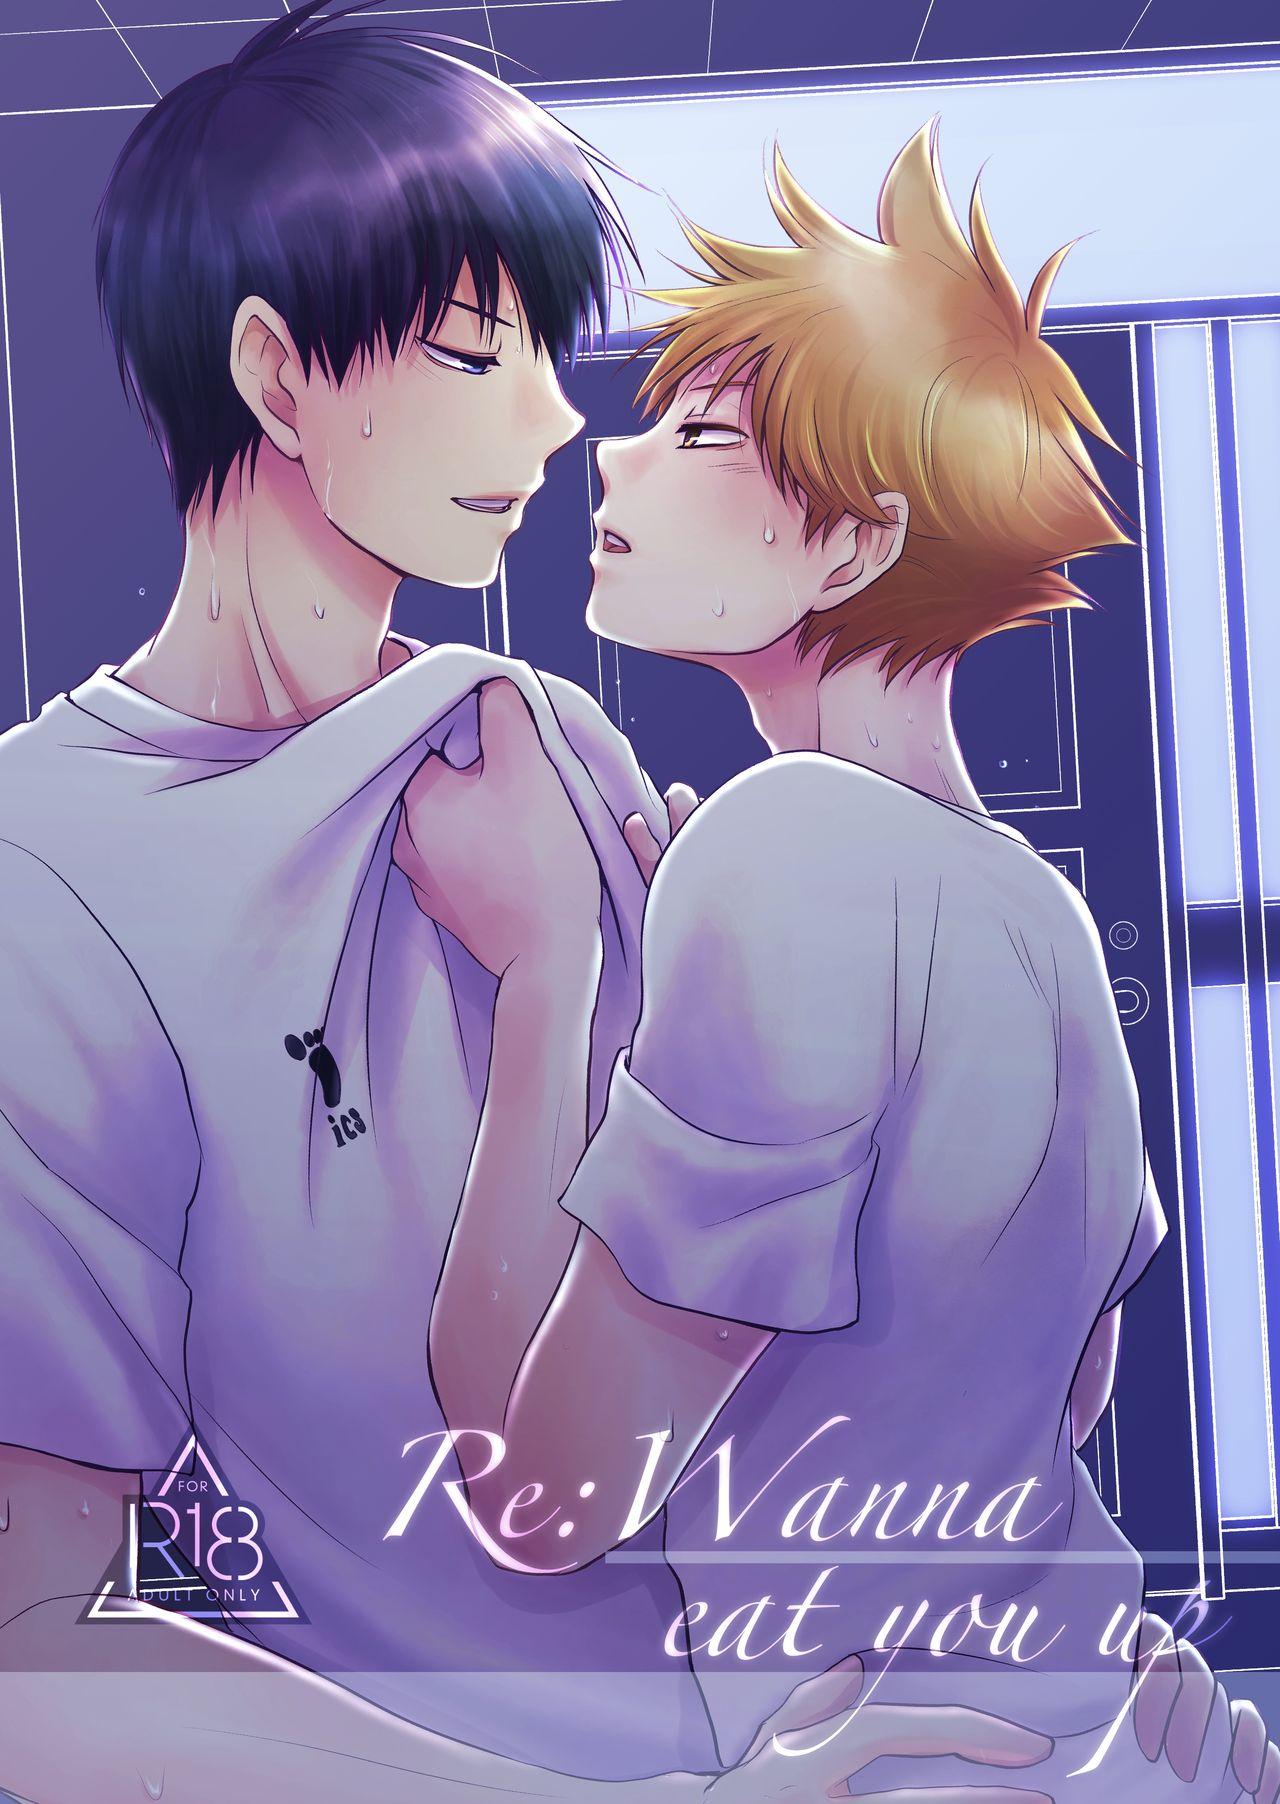 Re:Wanna eat you up 0